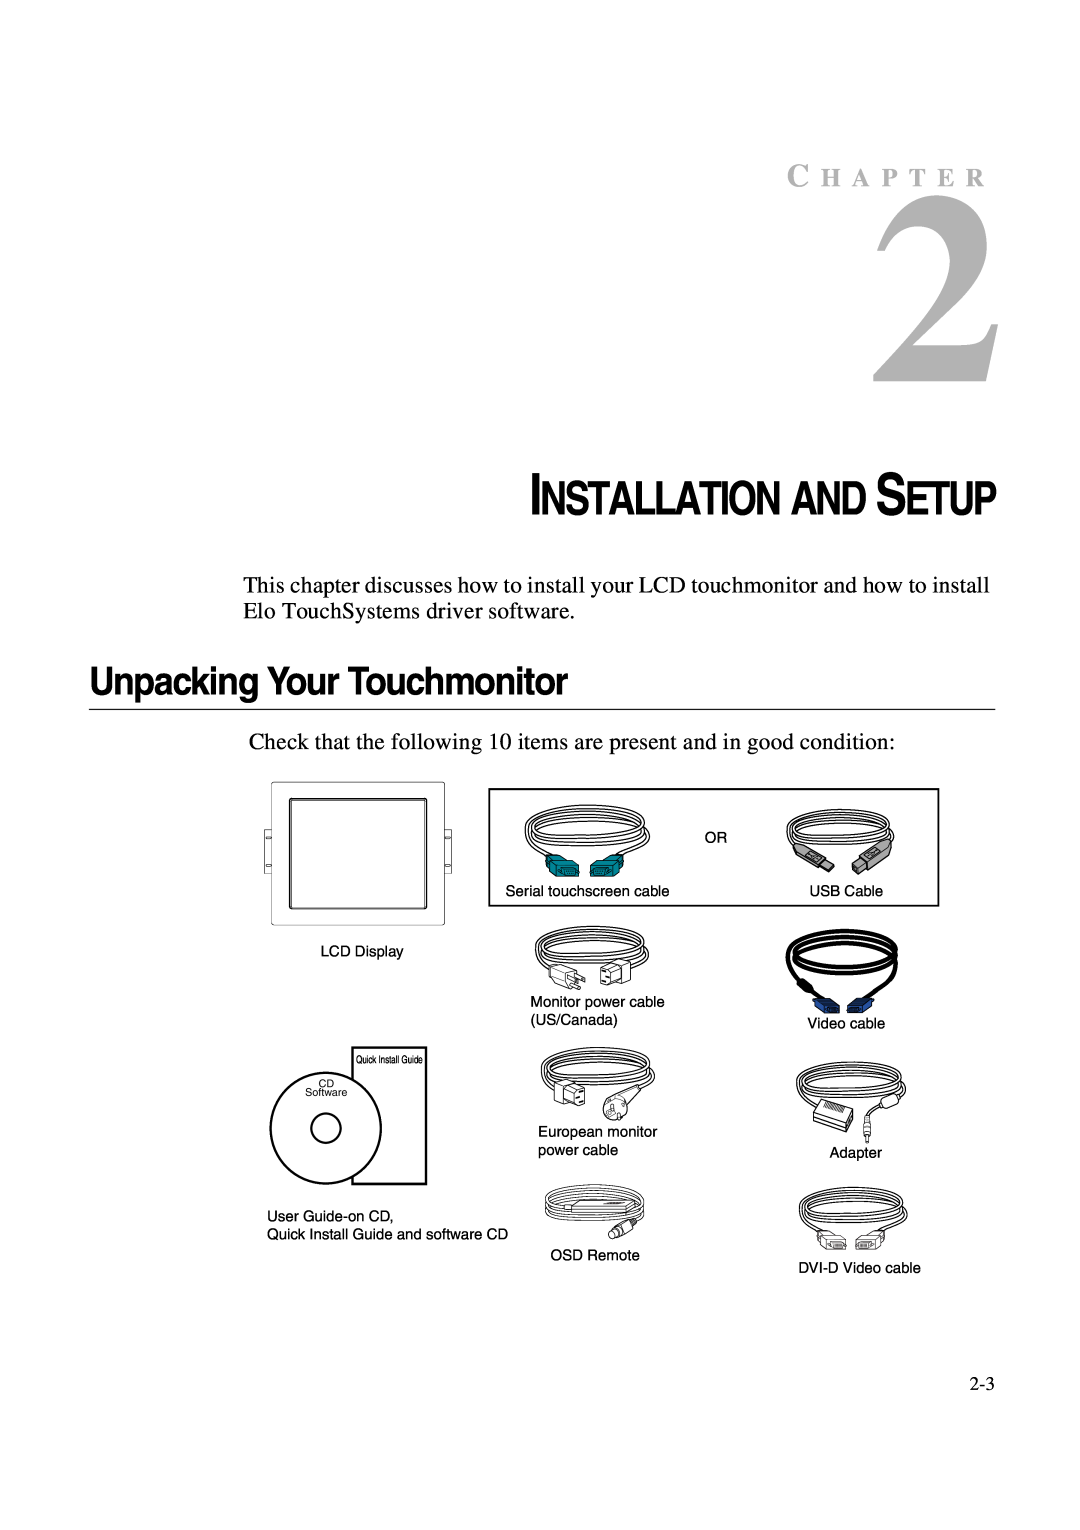 Tyco 1847L Series manual Installation And Setup, Unpacking Your Touchmonitor, C H A P T E R 